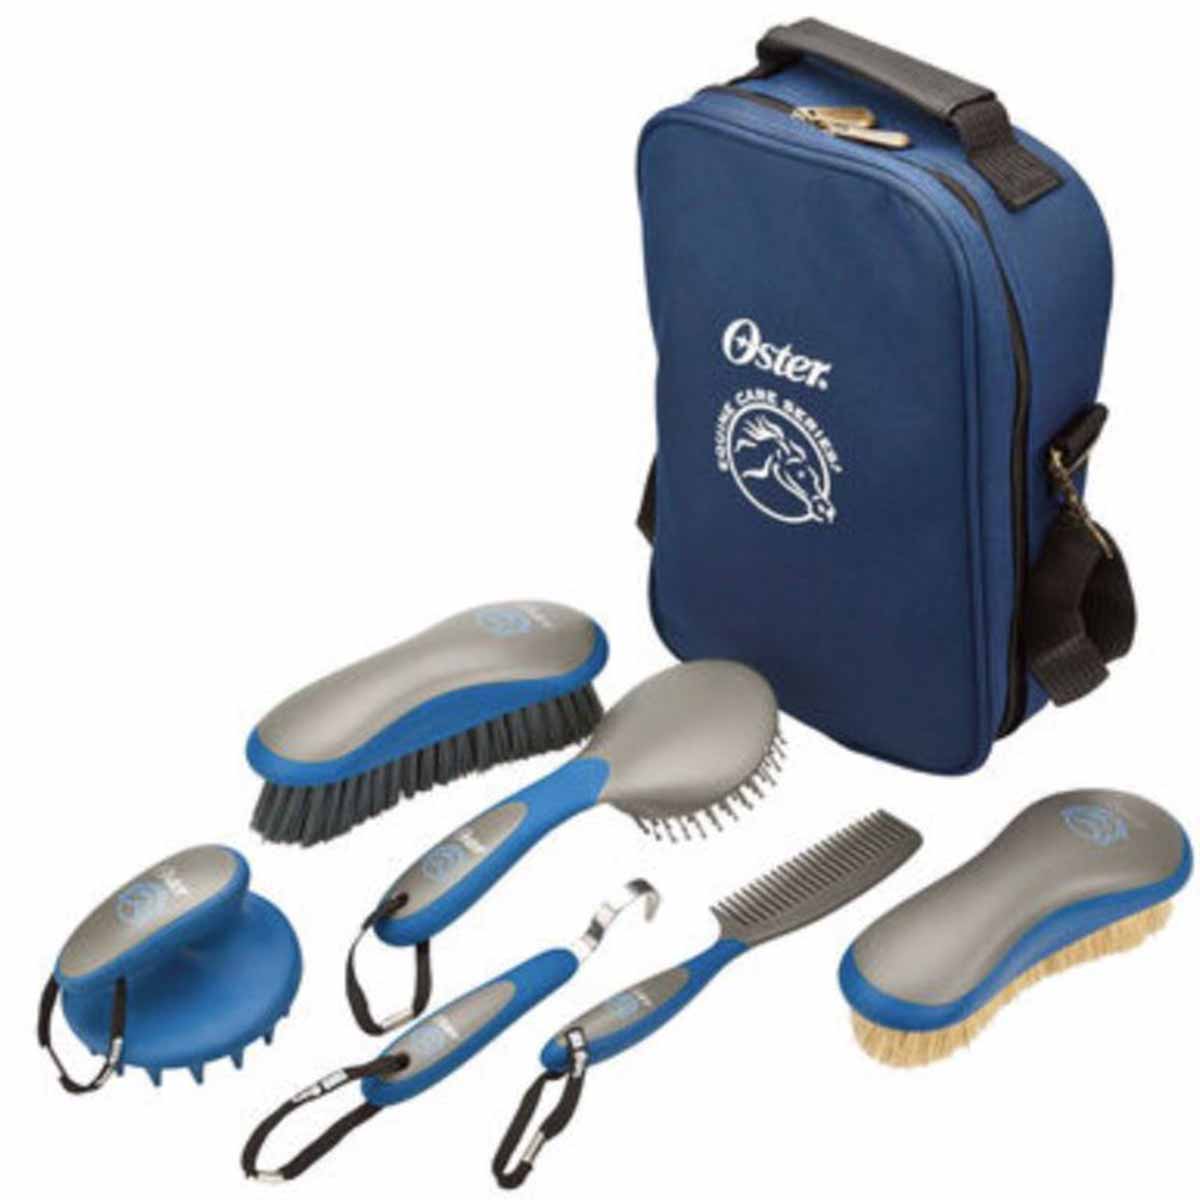 Oster Equine Care Series 7-delat grooming set - Blue